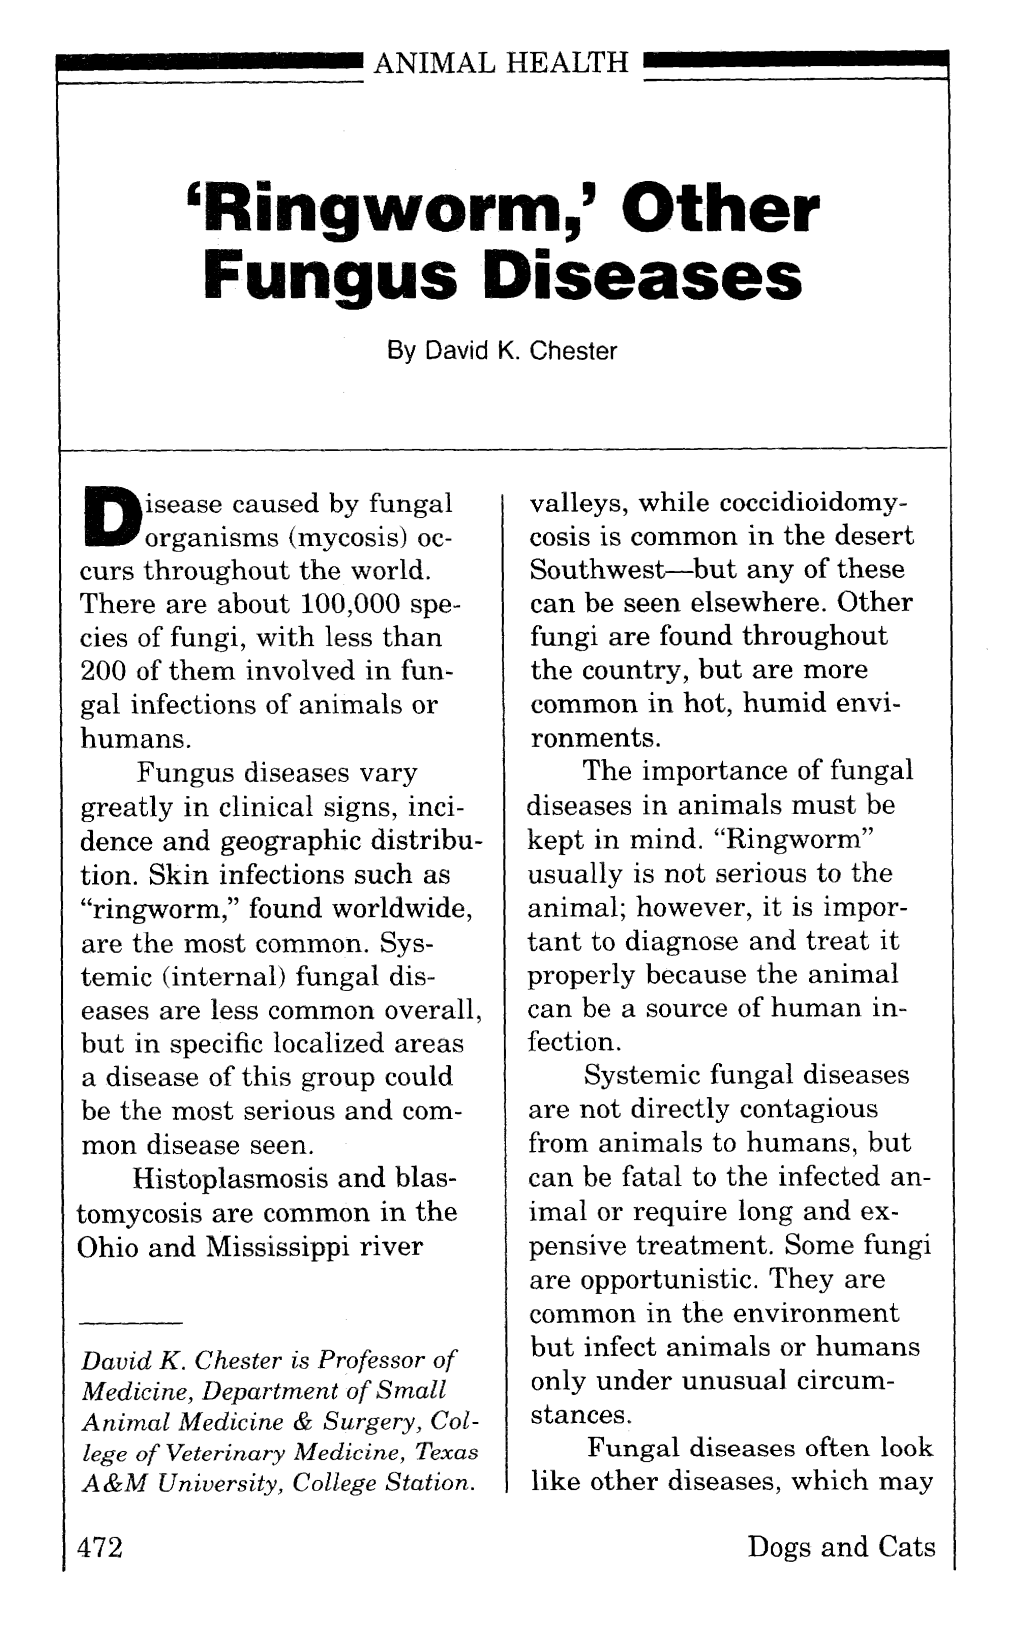 ^Ringworm/ Other Fungus Diseases by David K